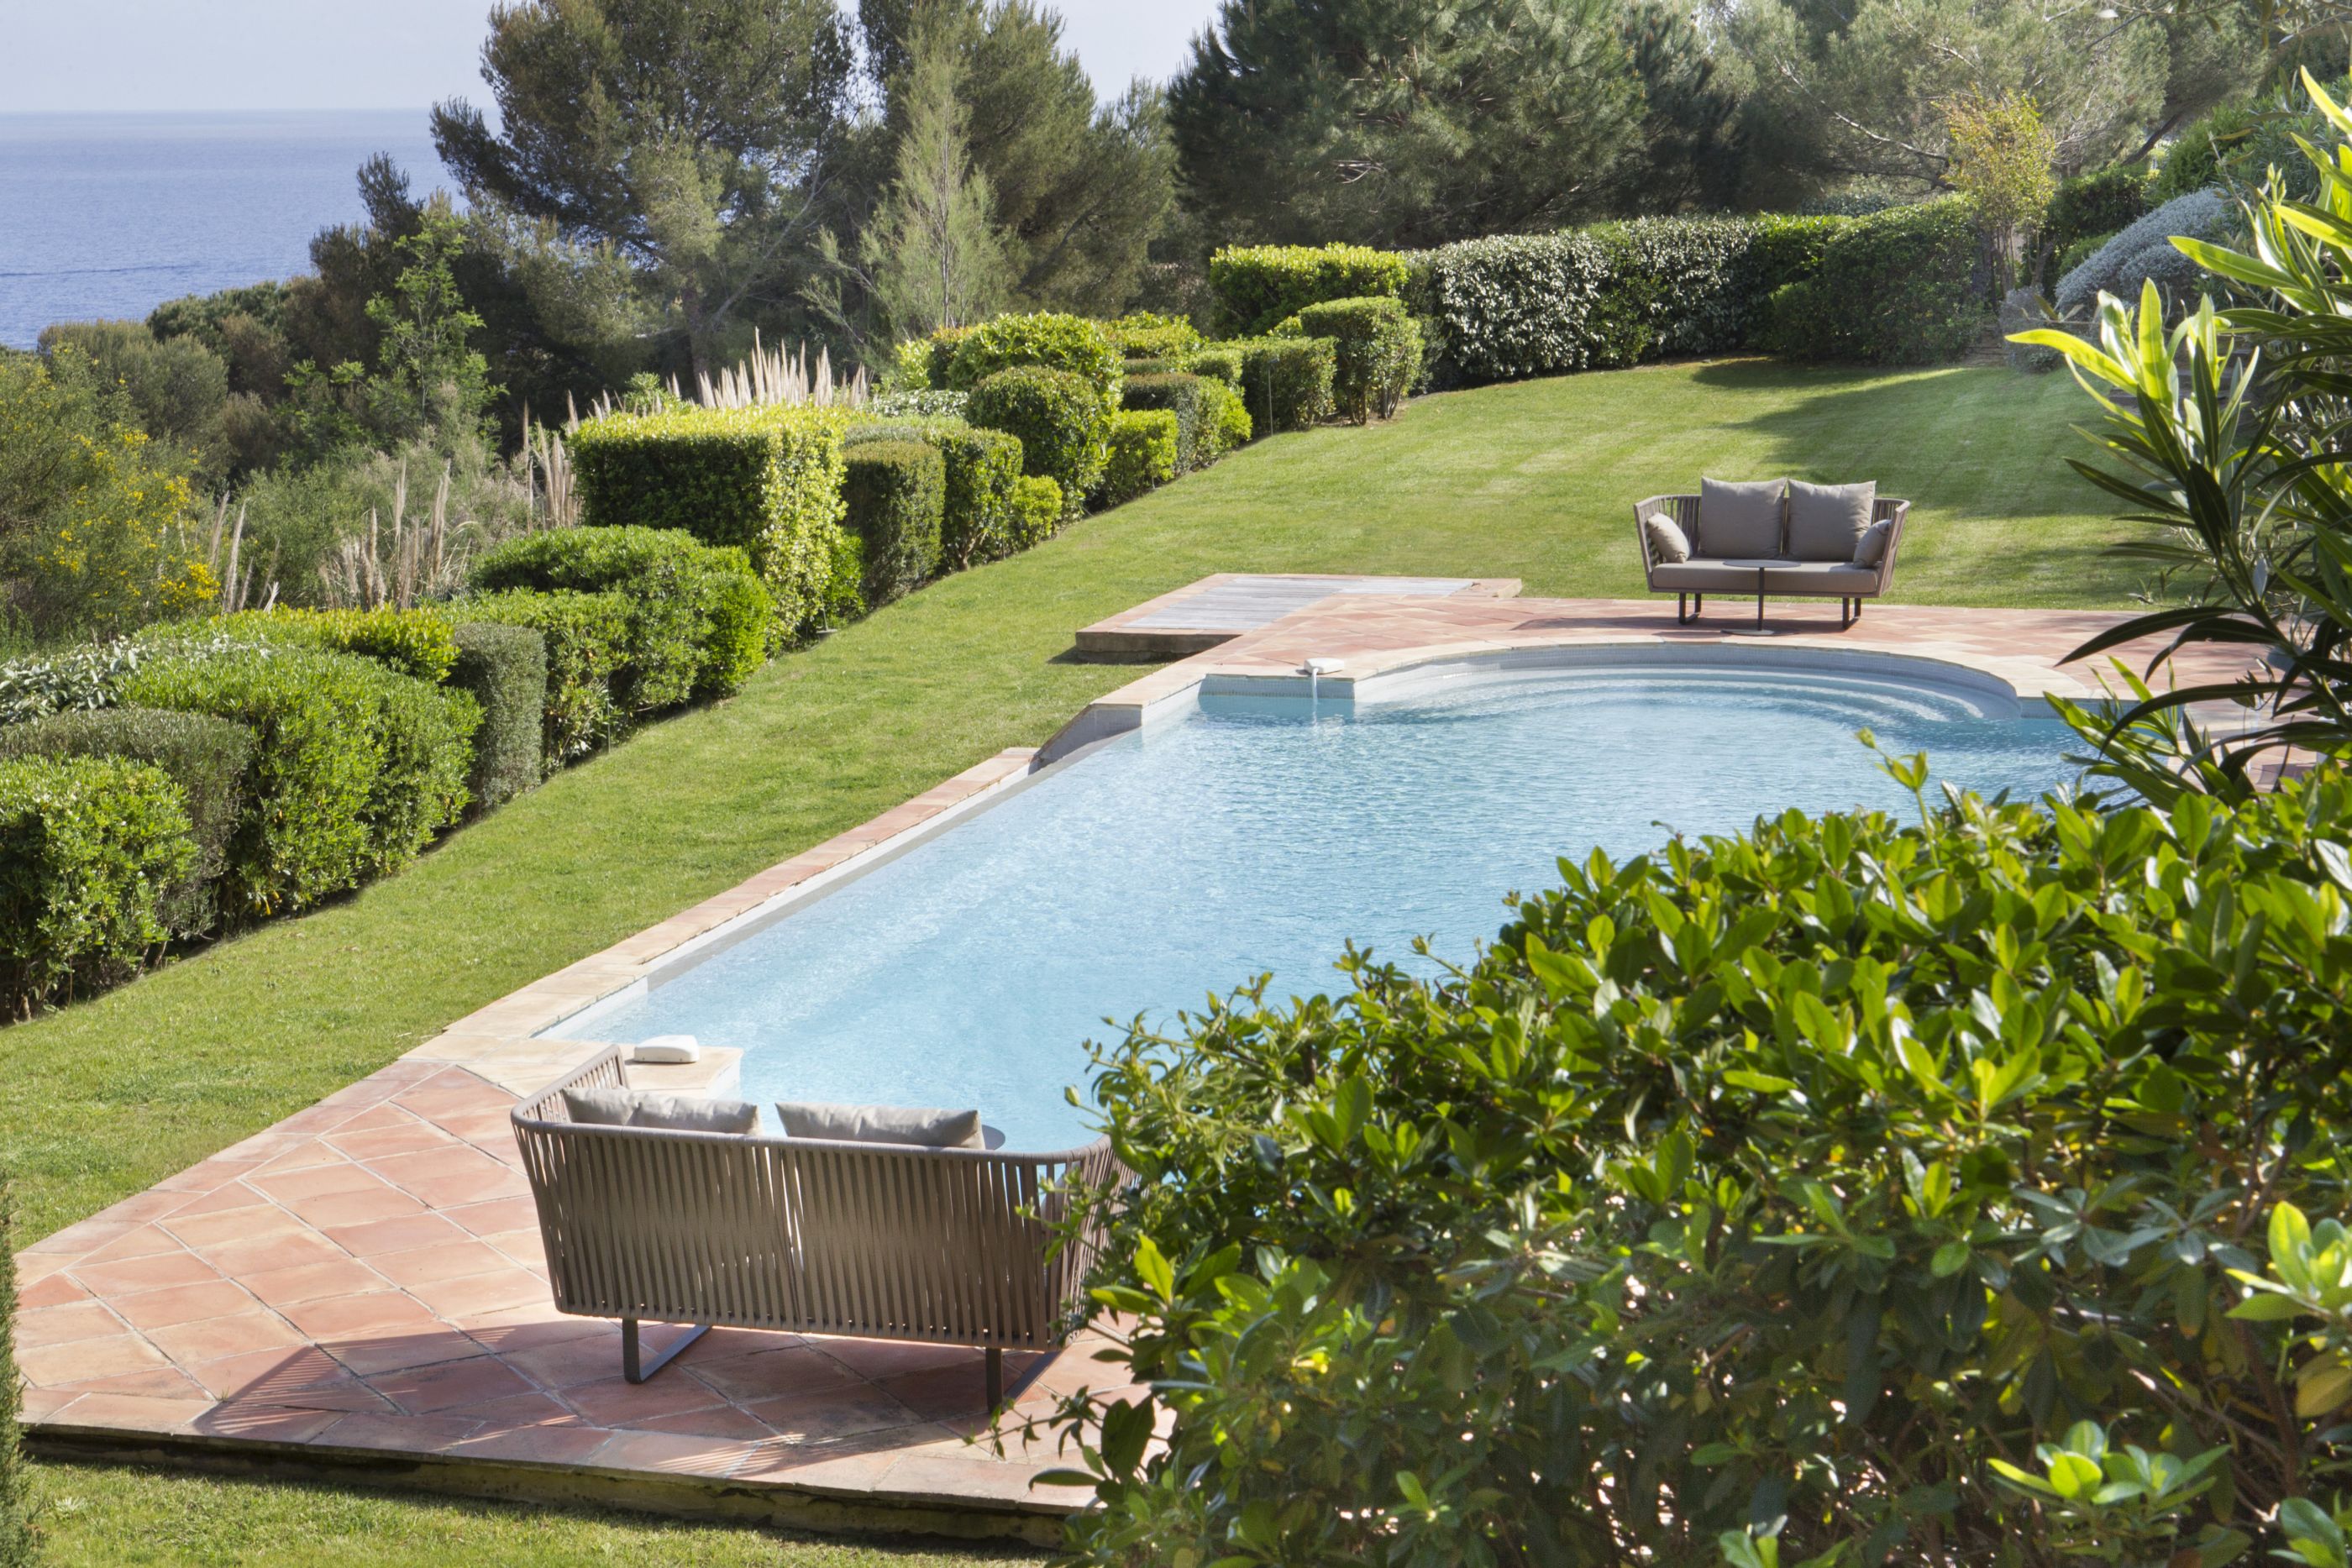 Outdoor swimming pool of a pool villa at La Reserve Ramatuelle, France